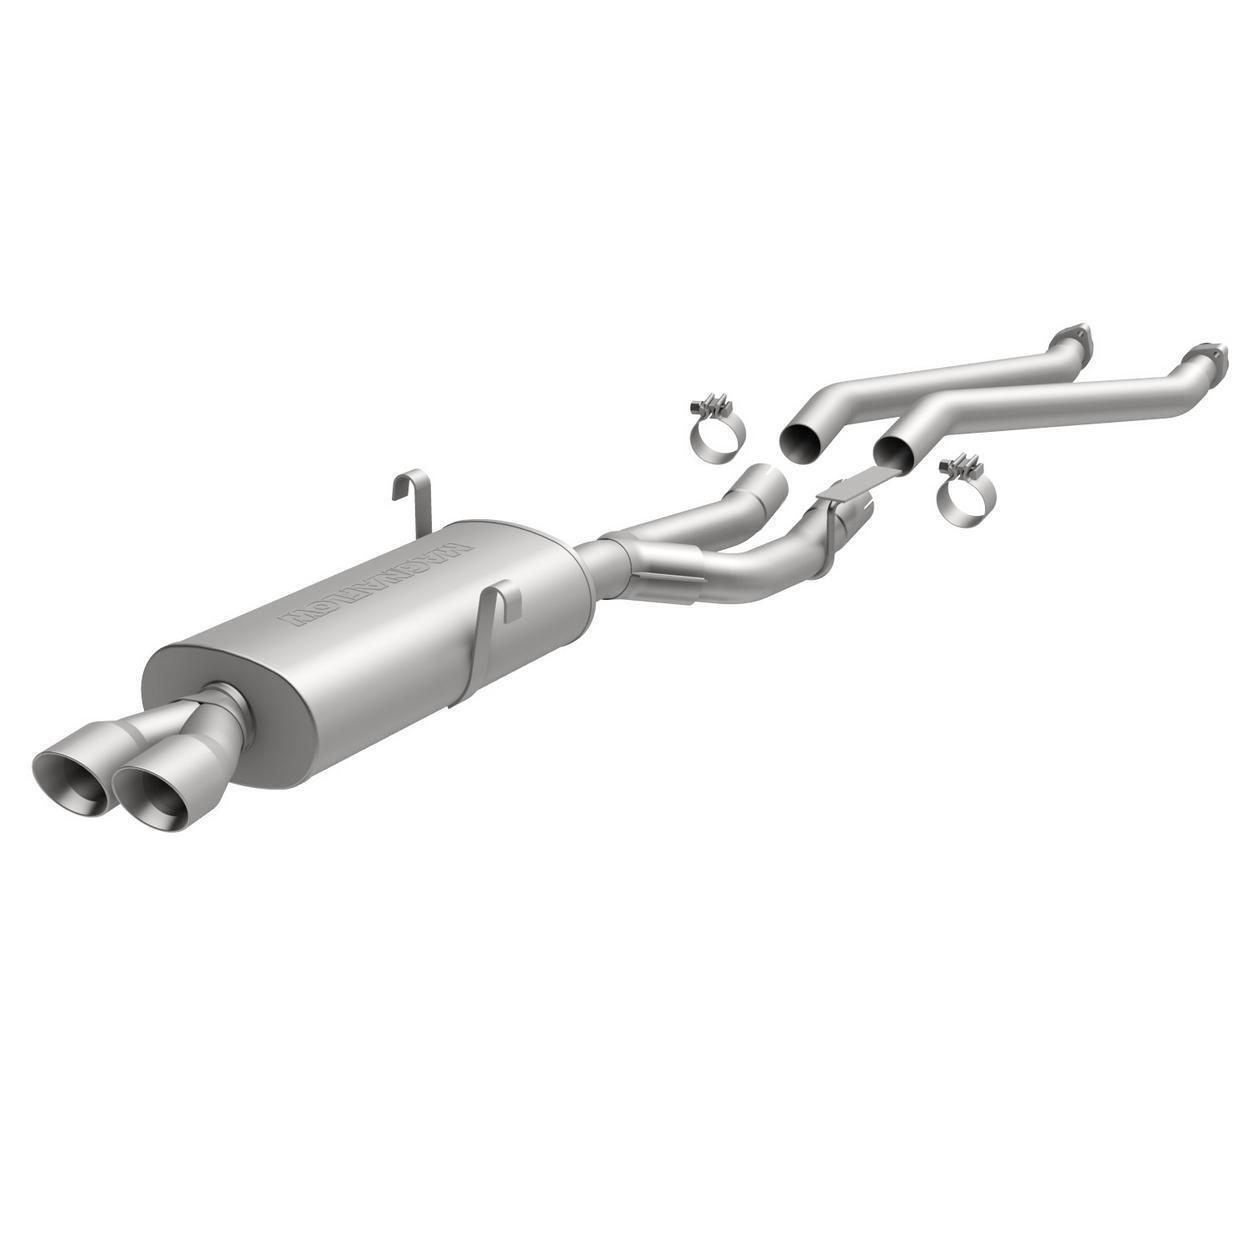 MagnaFlow 16535-AM Fits 1987 1988 1989 1990 BMW 325is Exhaust System Kit